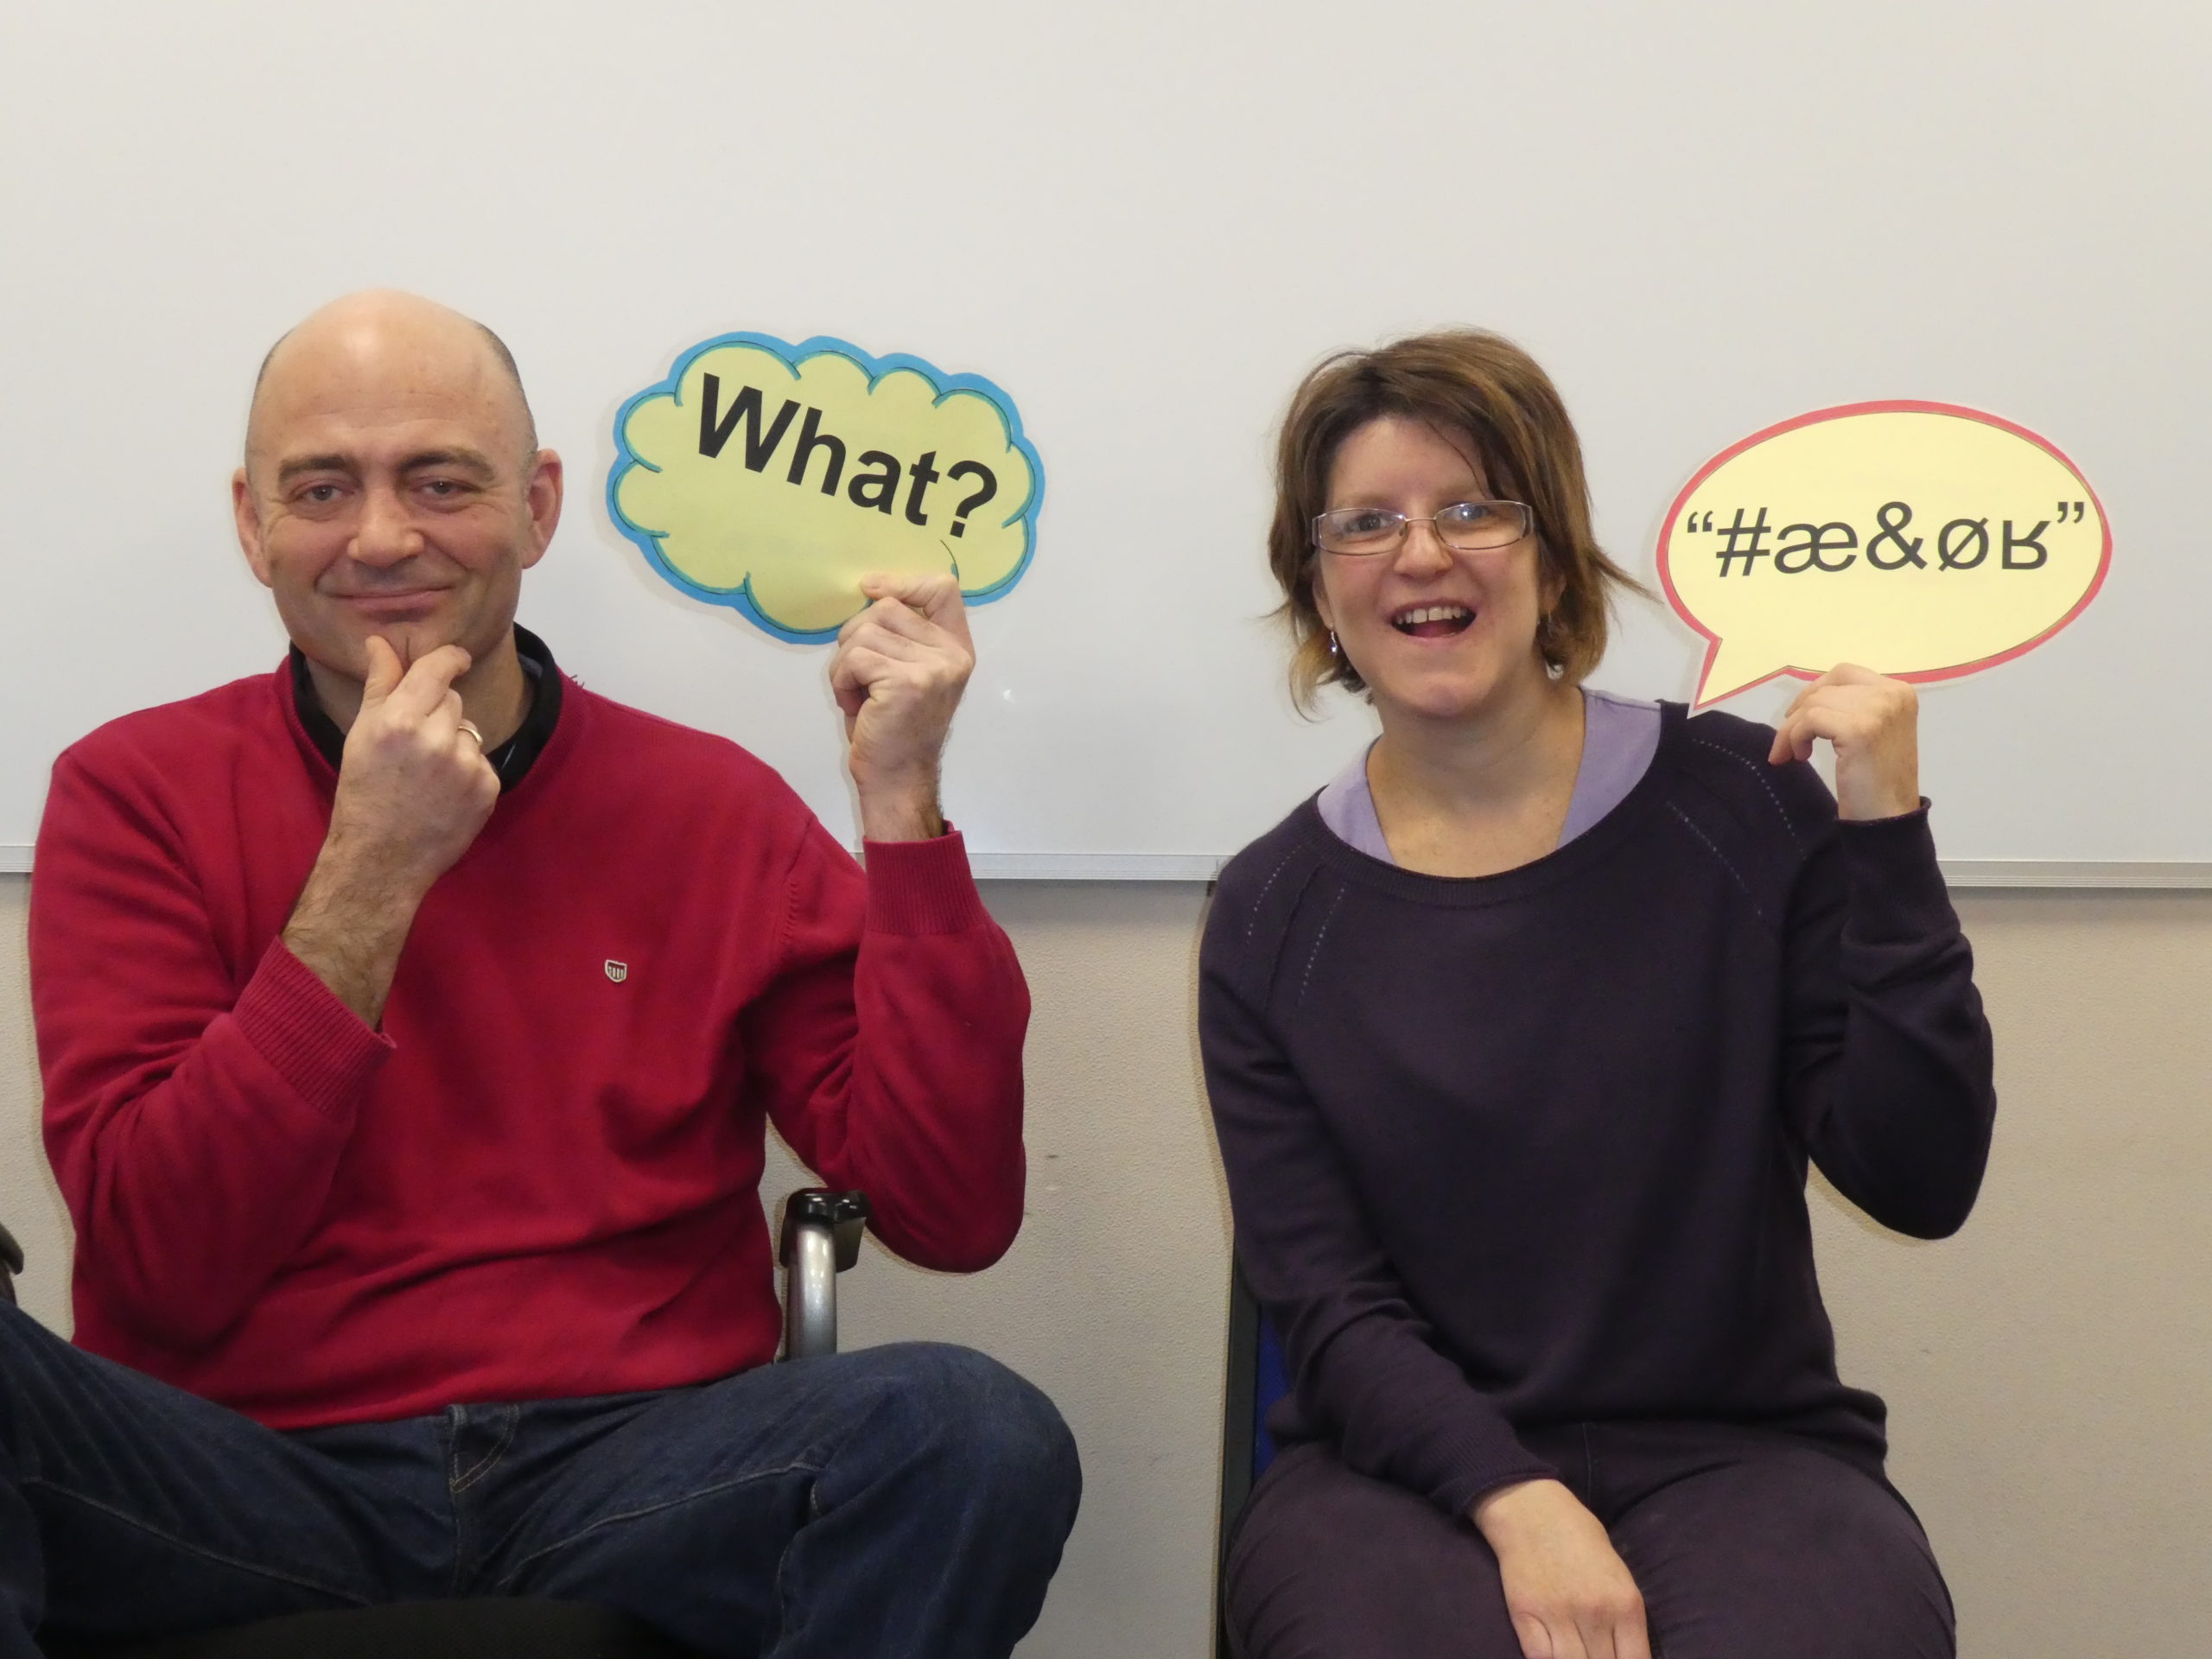 Two people holding speech bubbles looking confused and wanting to ask questions